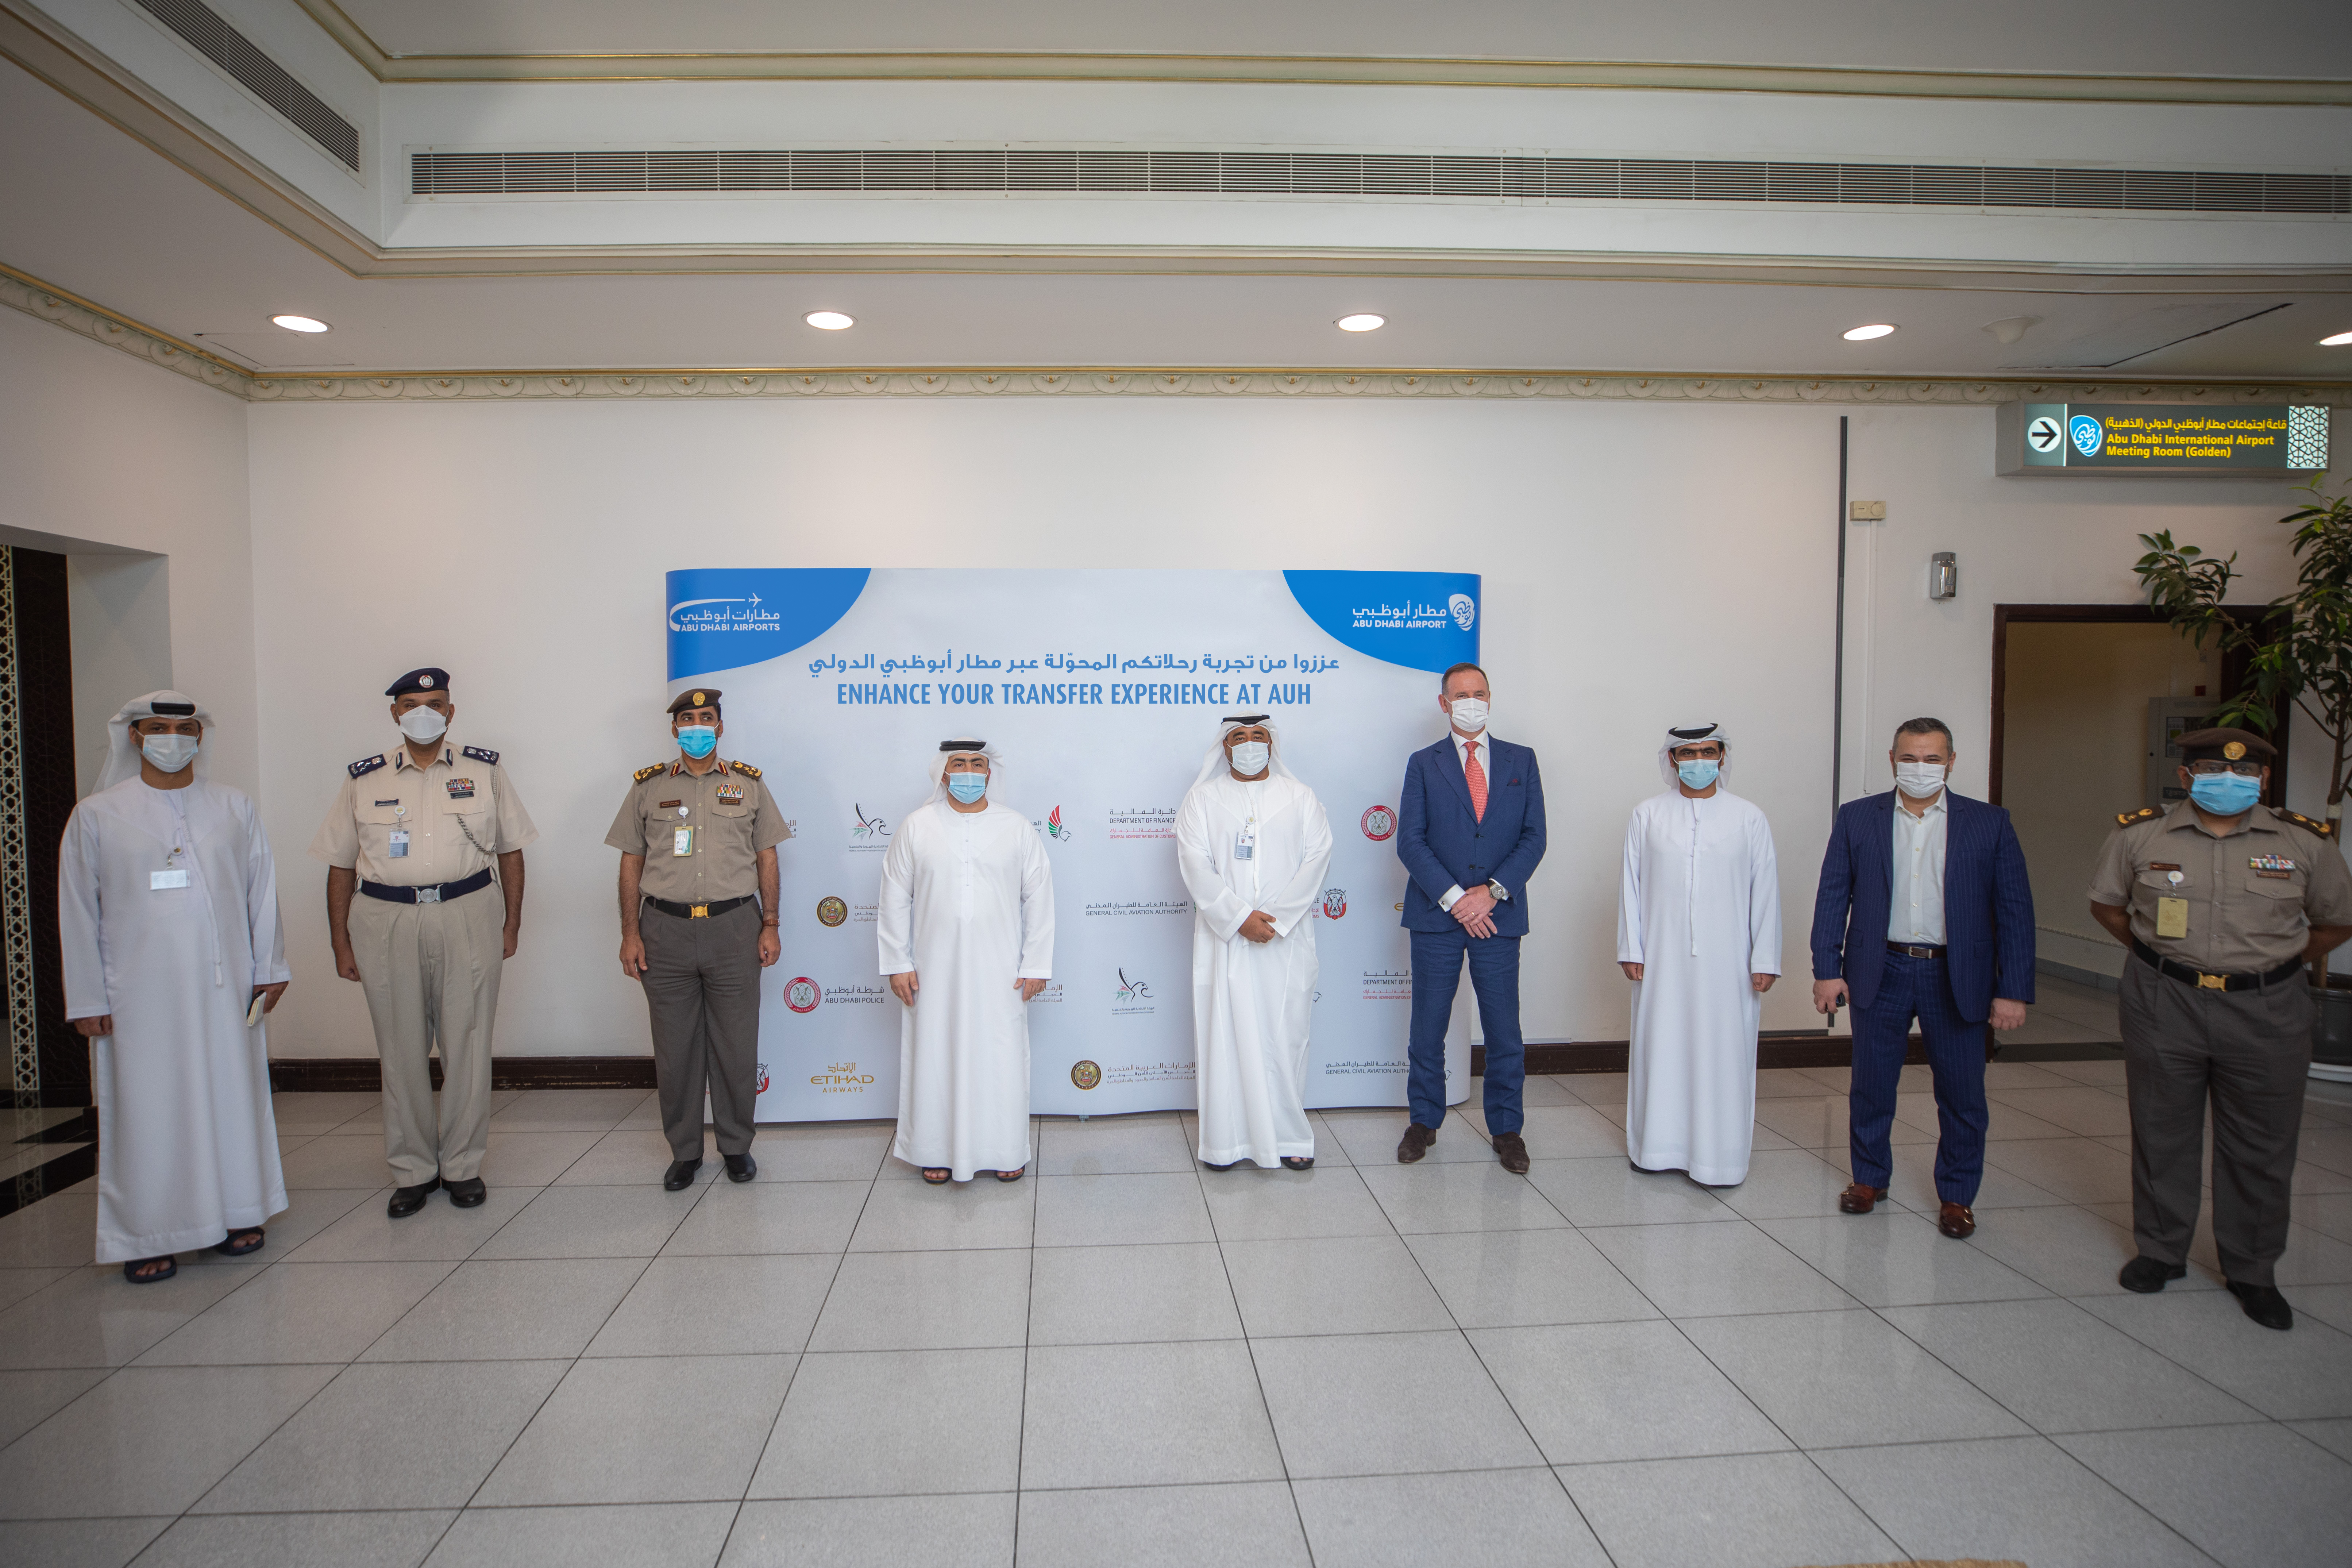 Abu Dhabi International Airport Introduces New Fast Track Flight Connections Initiative To Facilitate The Transfer Passengers’ Journey